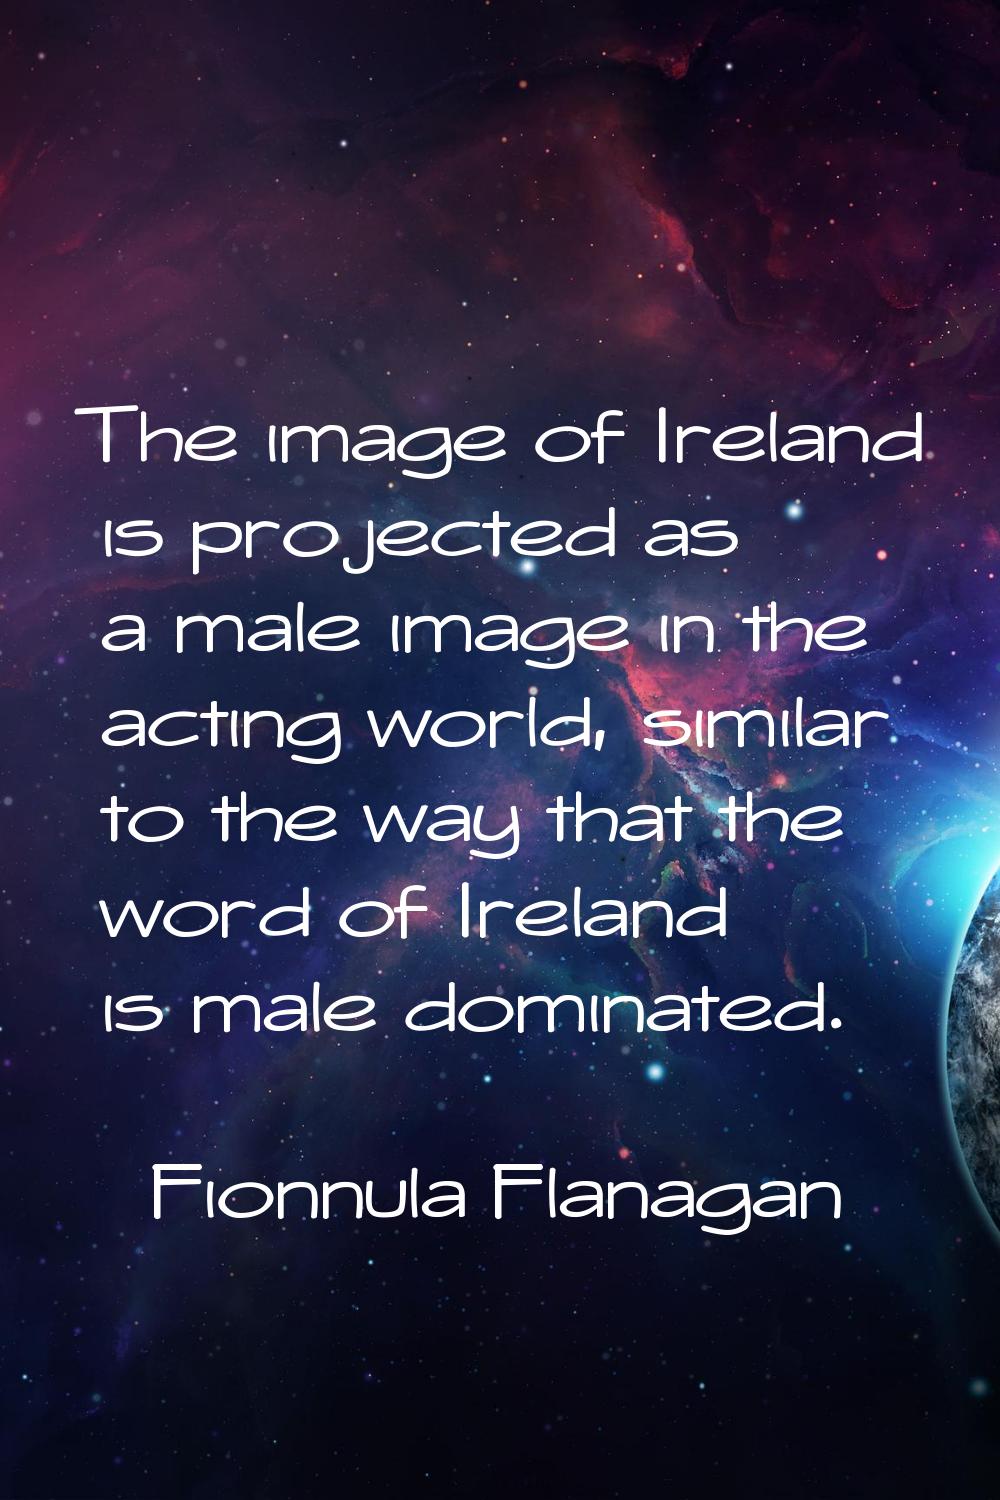 The image of Ireland is projected as a male image in the acting world, similar to the way that the 